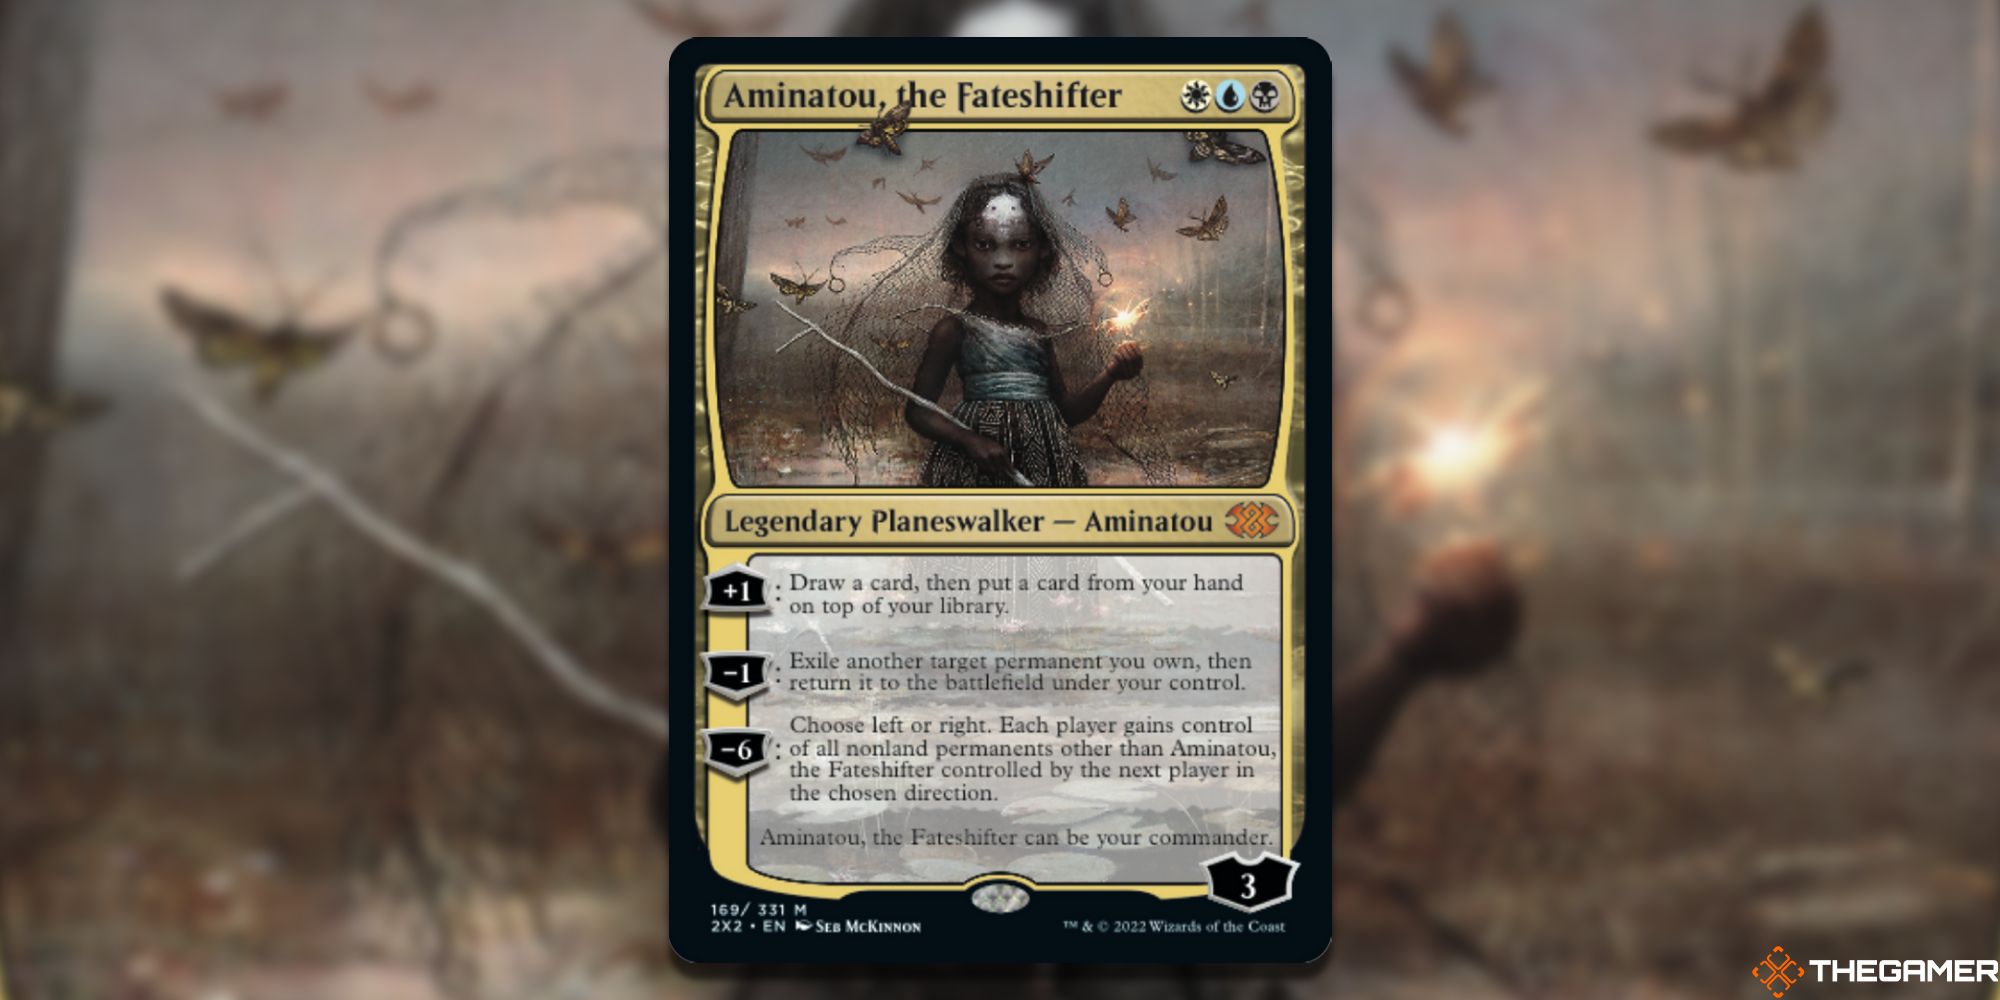 Image of the Aminatou the Fateshifter card in Magic: The Gathering, with art by Seb McKinnon